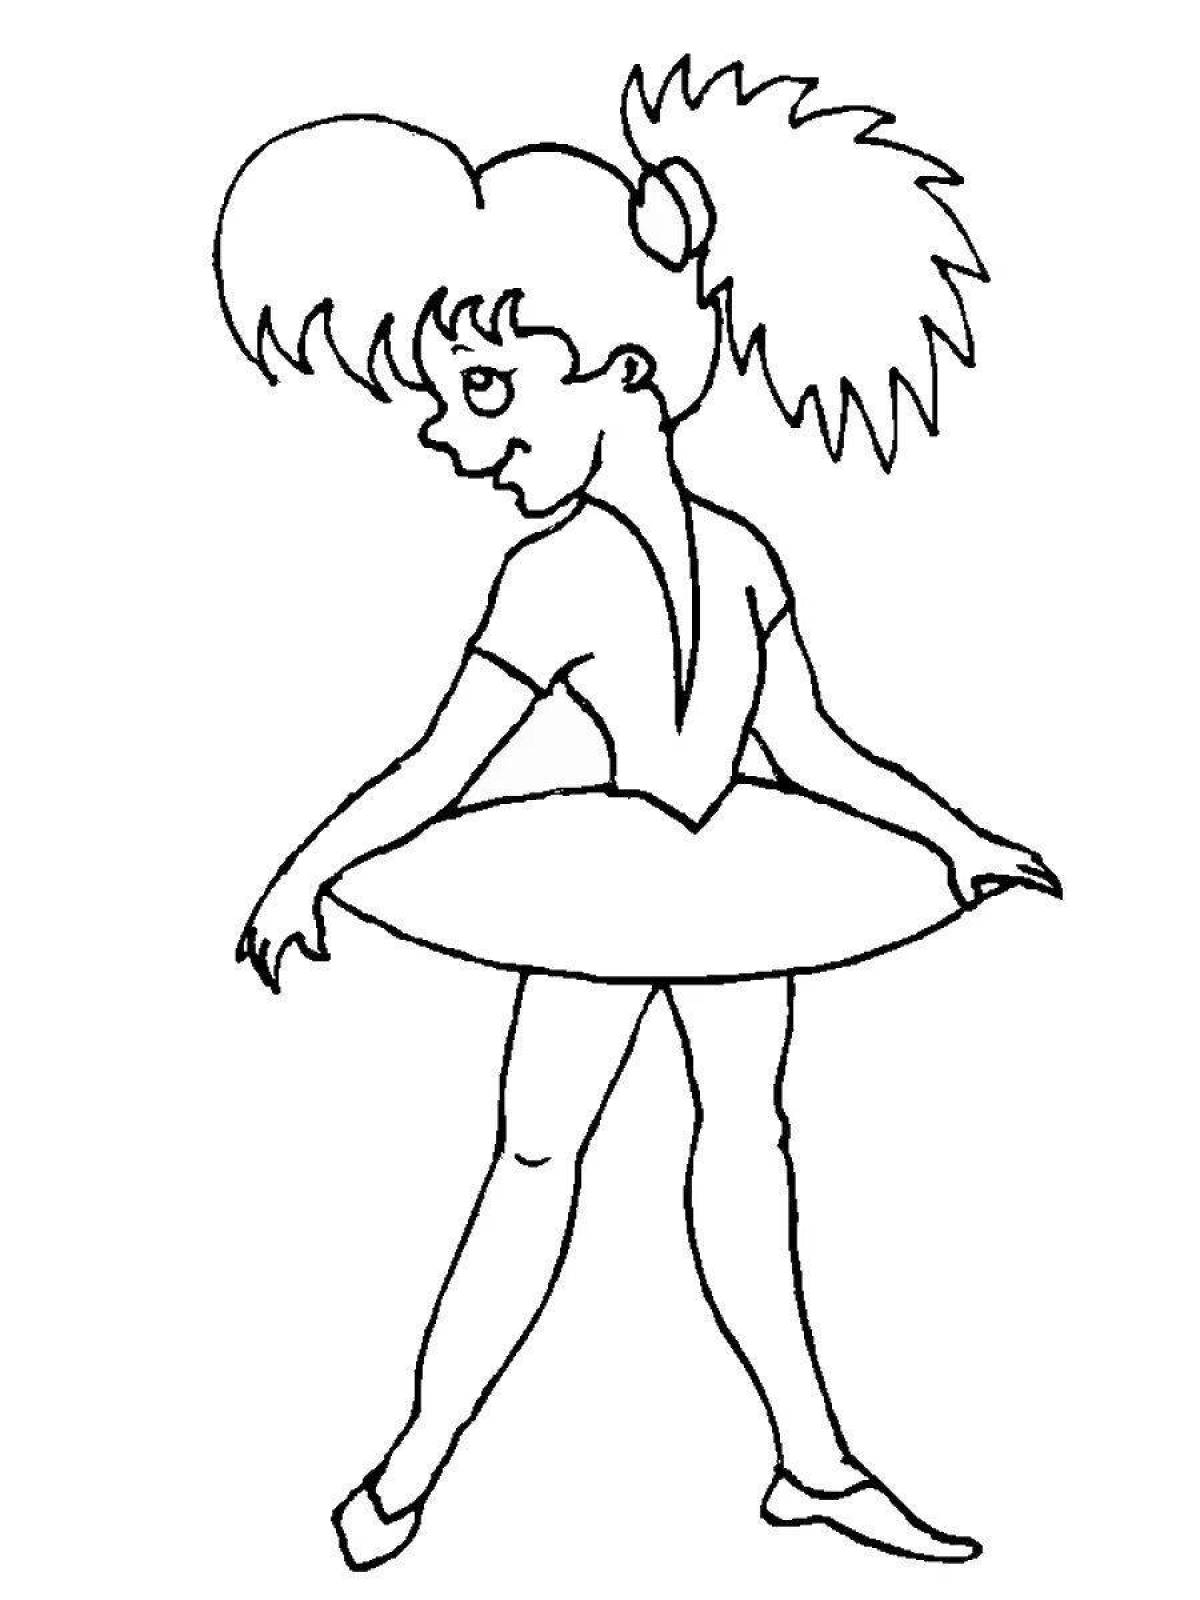 Exciting dancing girl coloring book